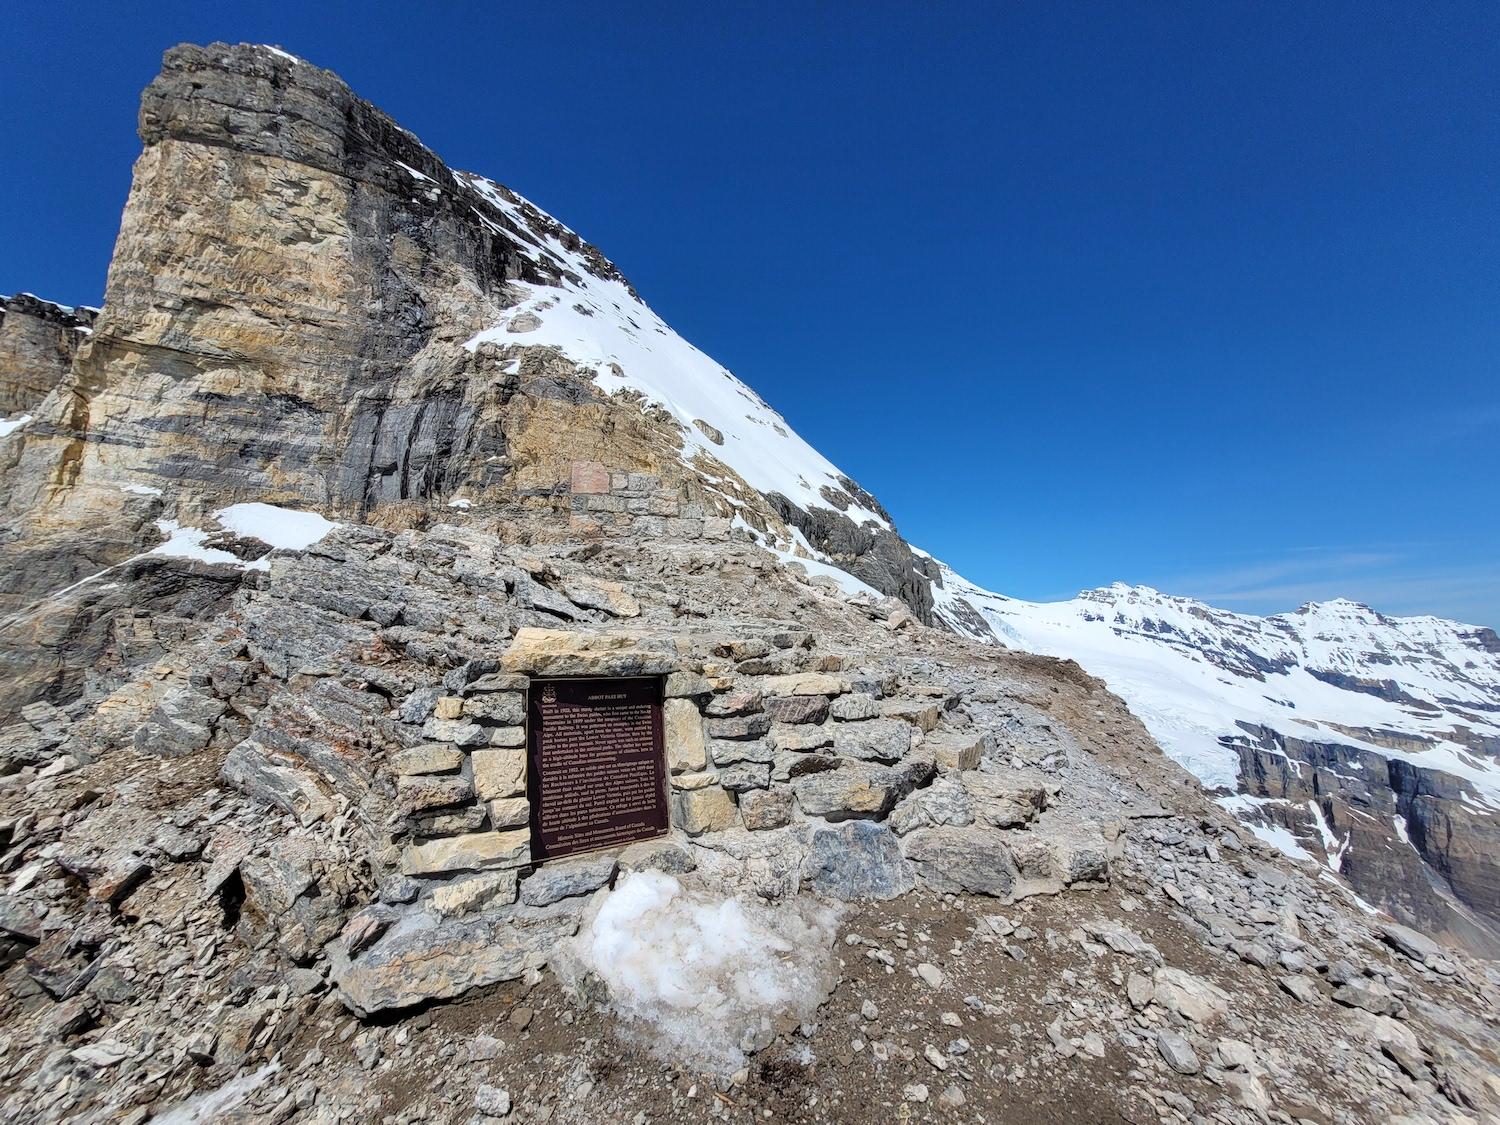 In 2022, most of the iconic stone shelter known as Abbot Pass Hut was removed. 